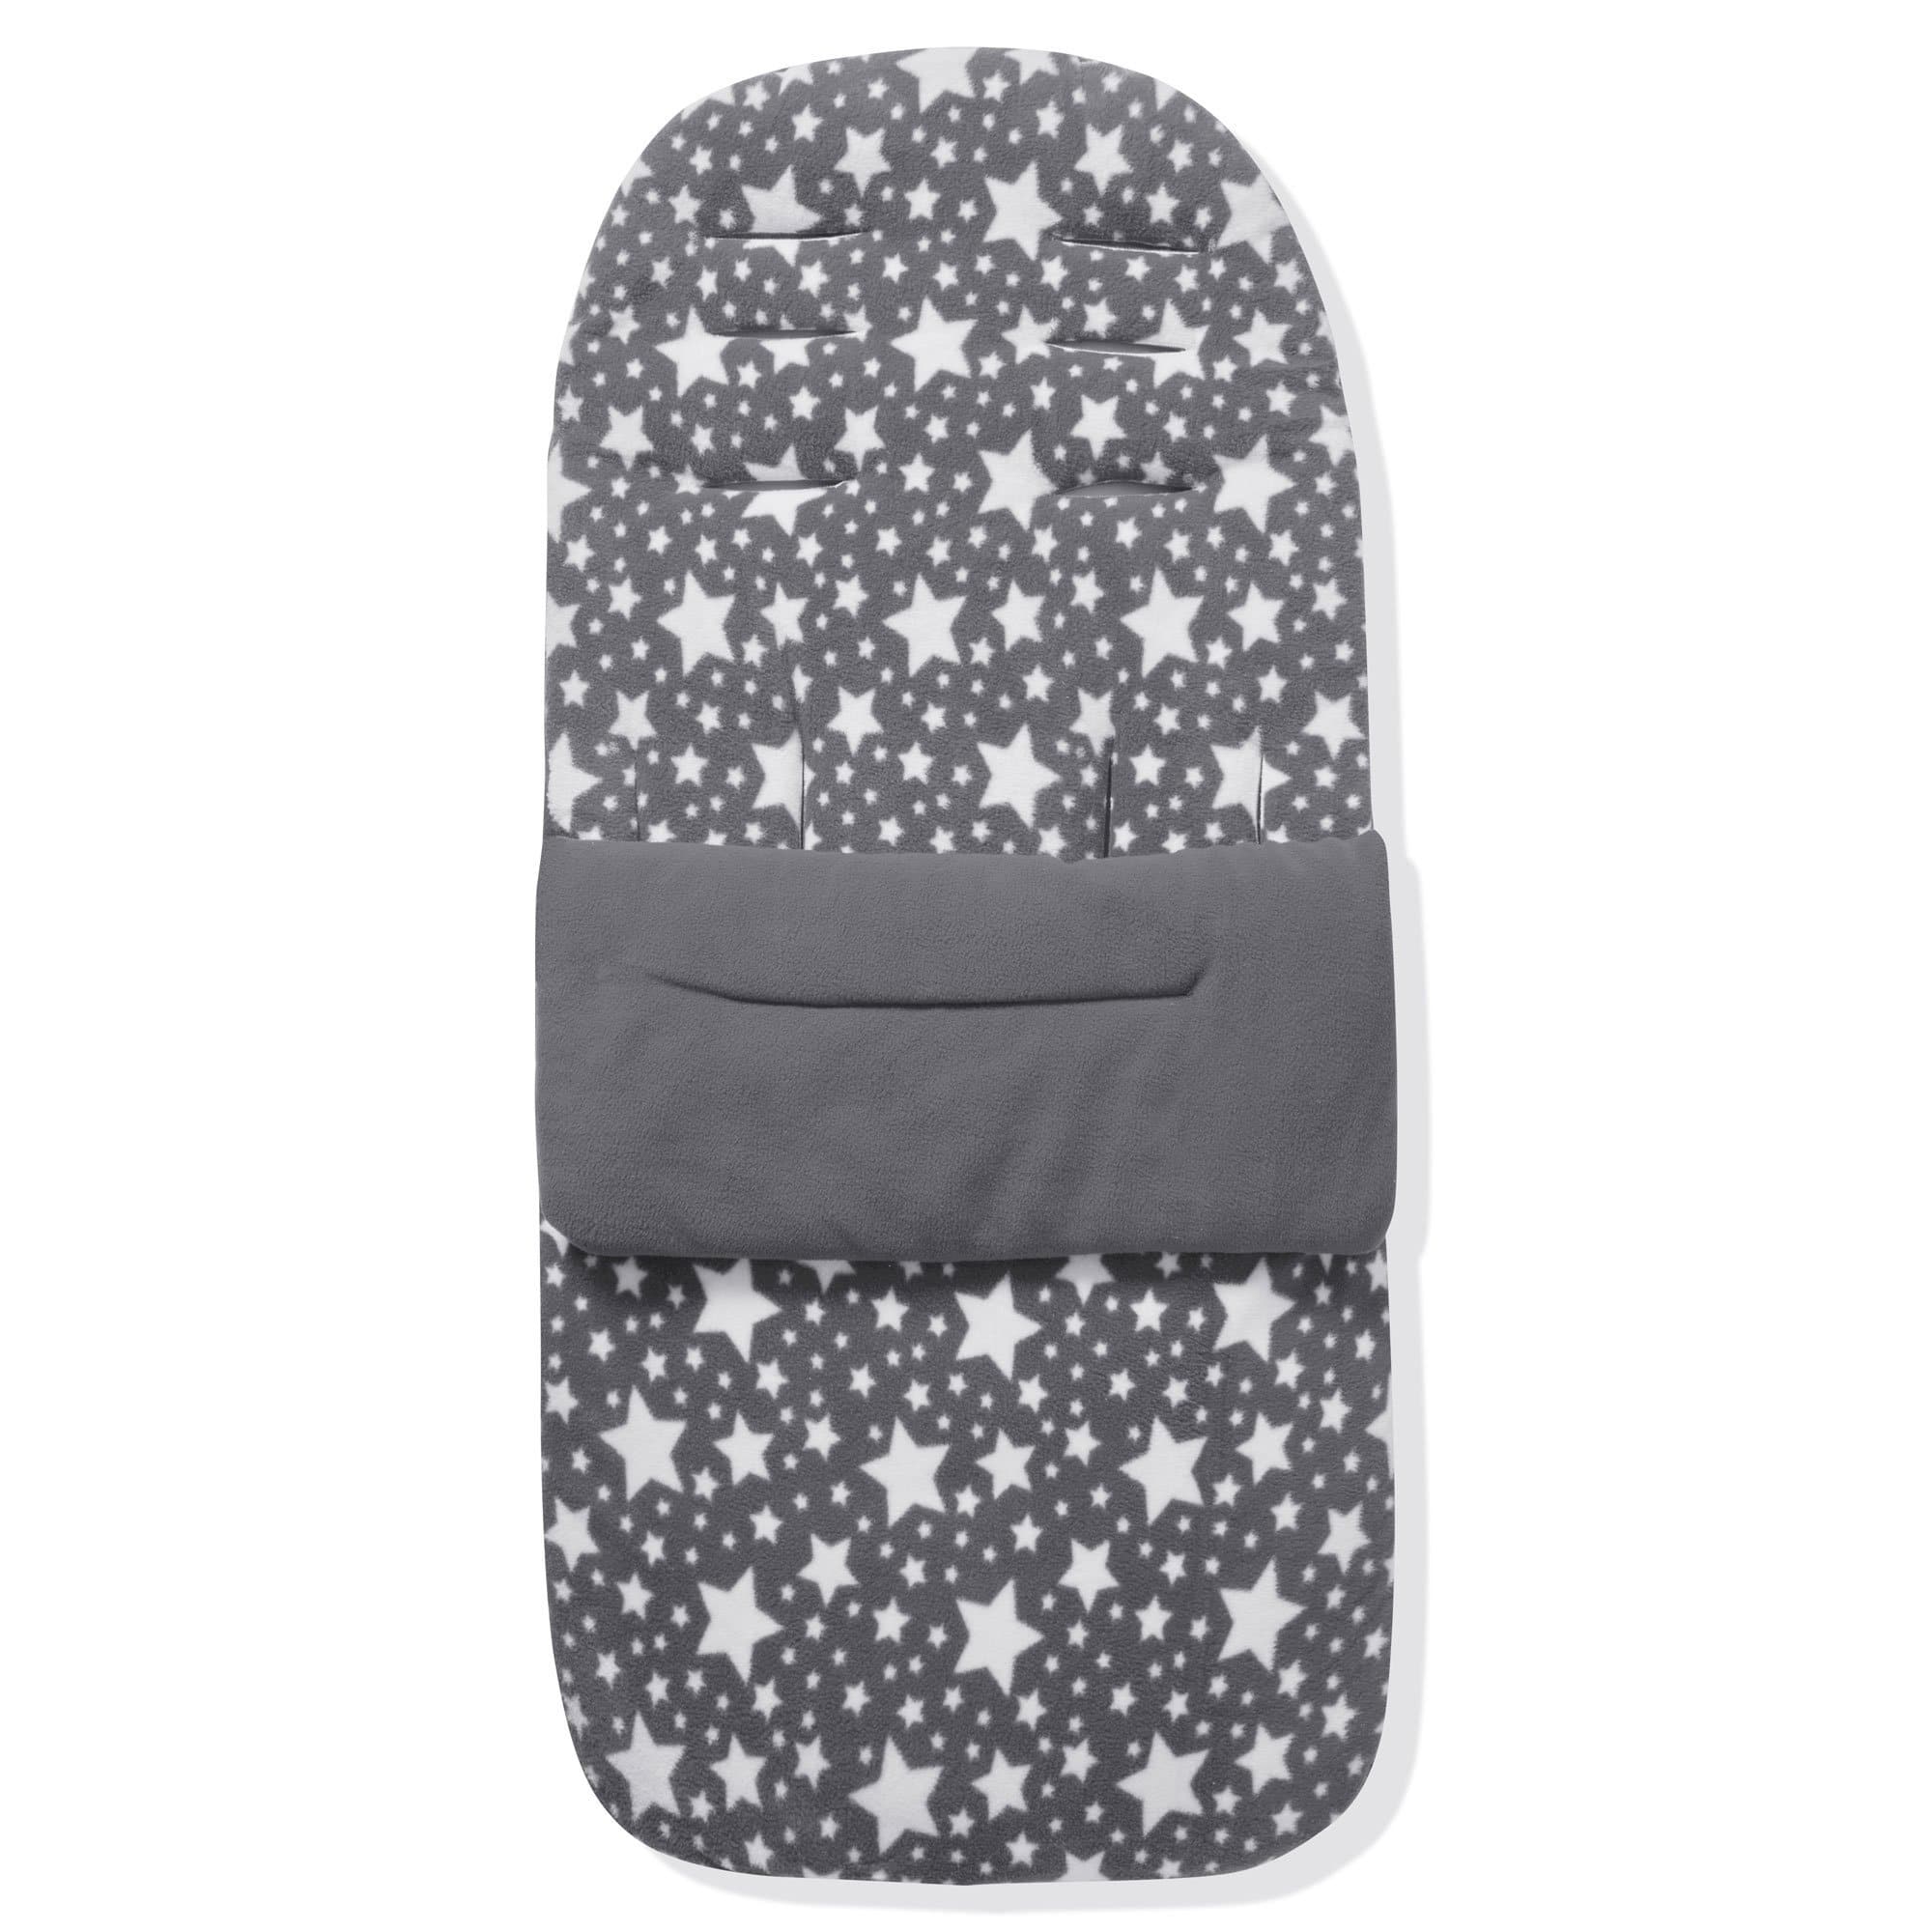 Fleece Footmuff / Cosy Toes Compatible with Valco - Grey Star / Fits All Models | For Your Little One